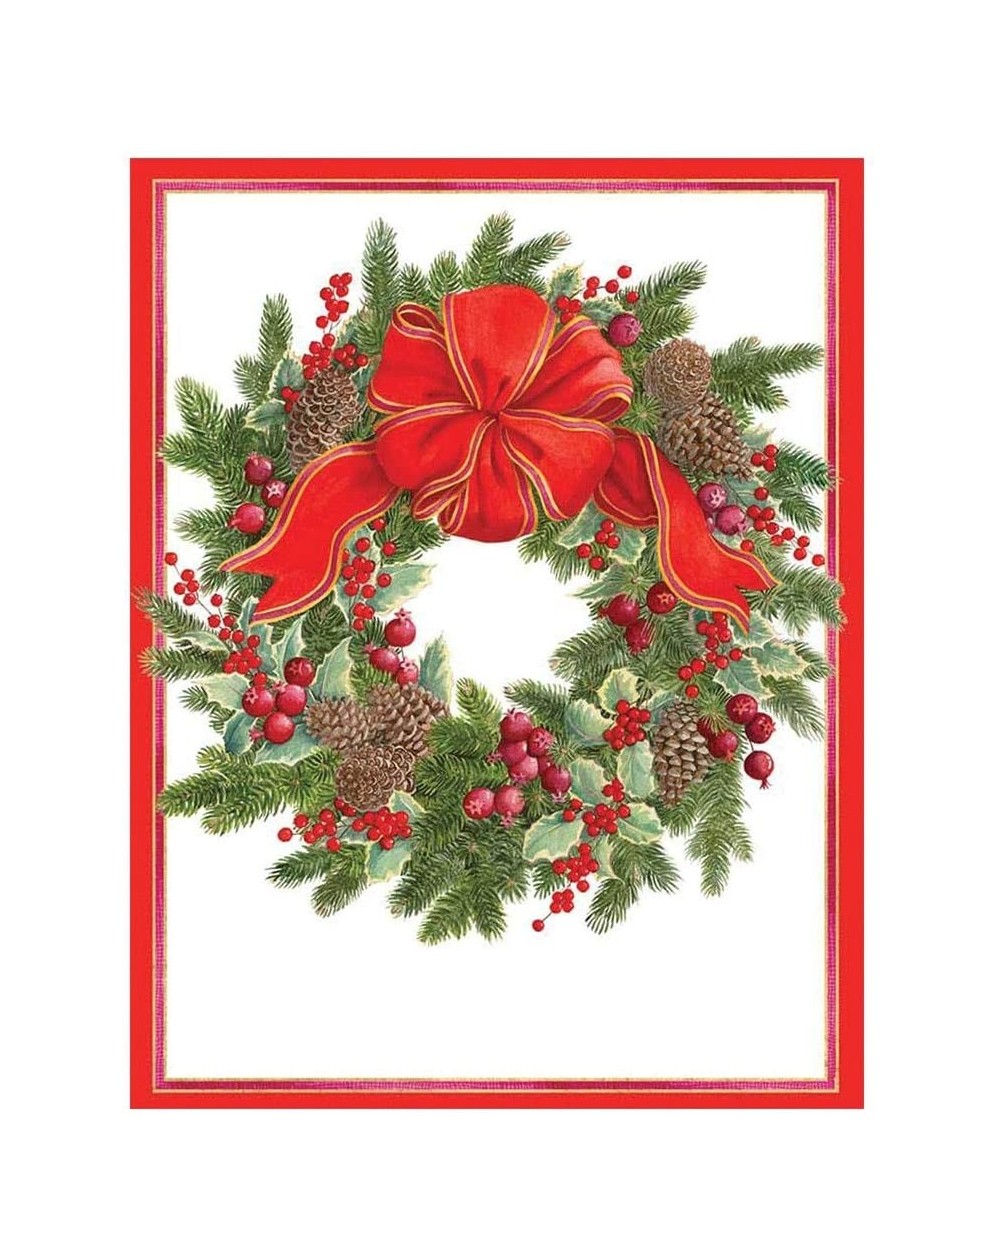 Party Packs Wreath with Greens & Berries Boxed Christmas Cards - 16 Cards & Envelopes - Green and Berries - C212EMARVQ5 $18.76